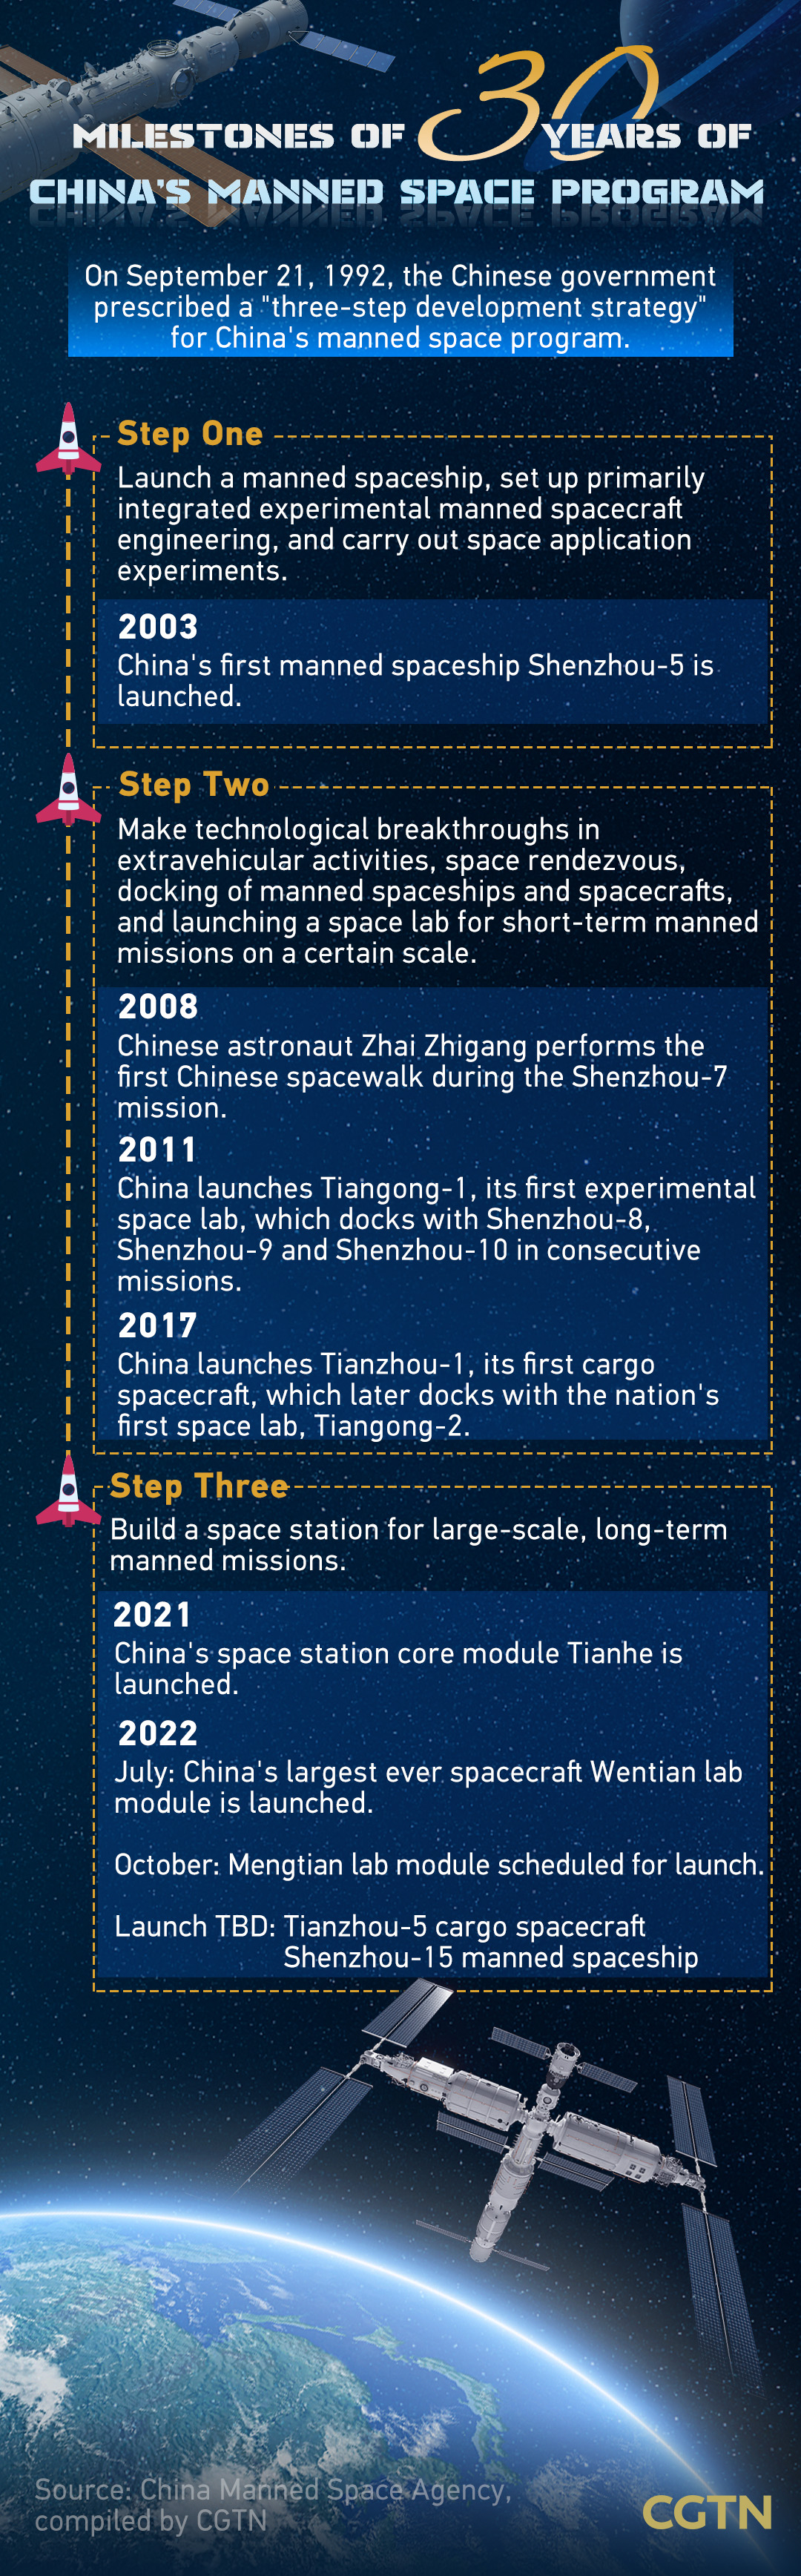 Chart of the Day: Highlights of 30 years of China's manned space program